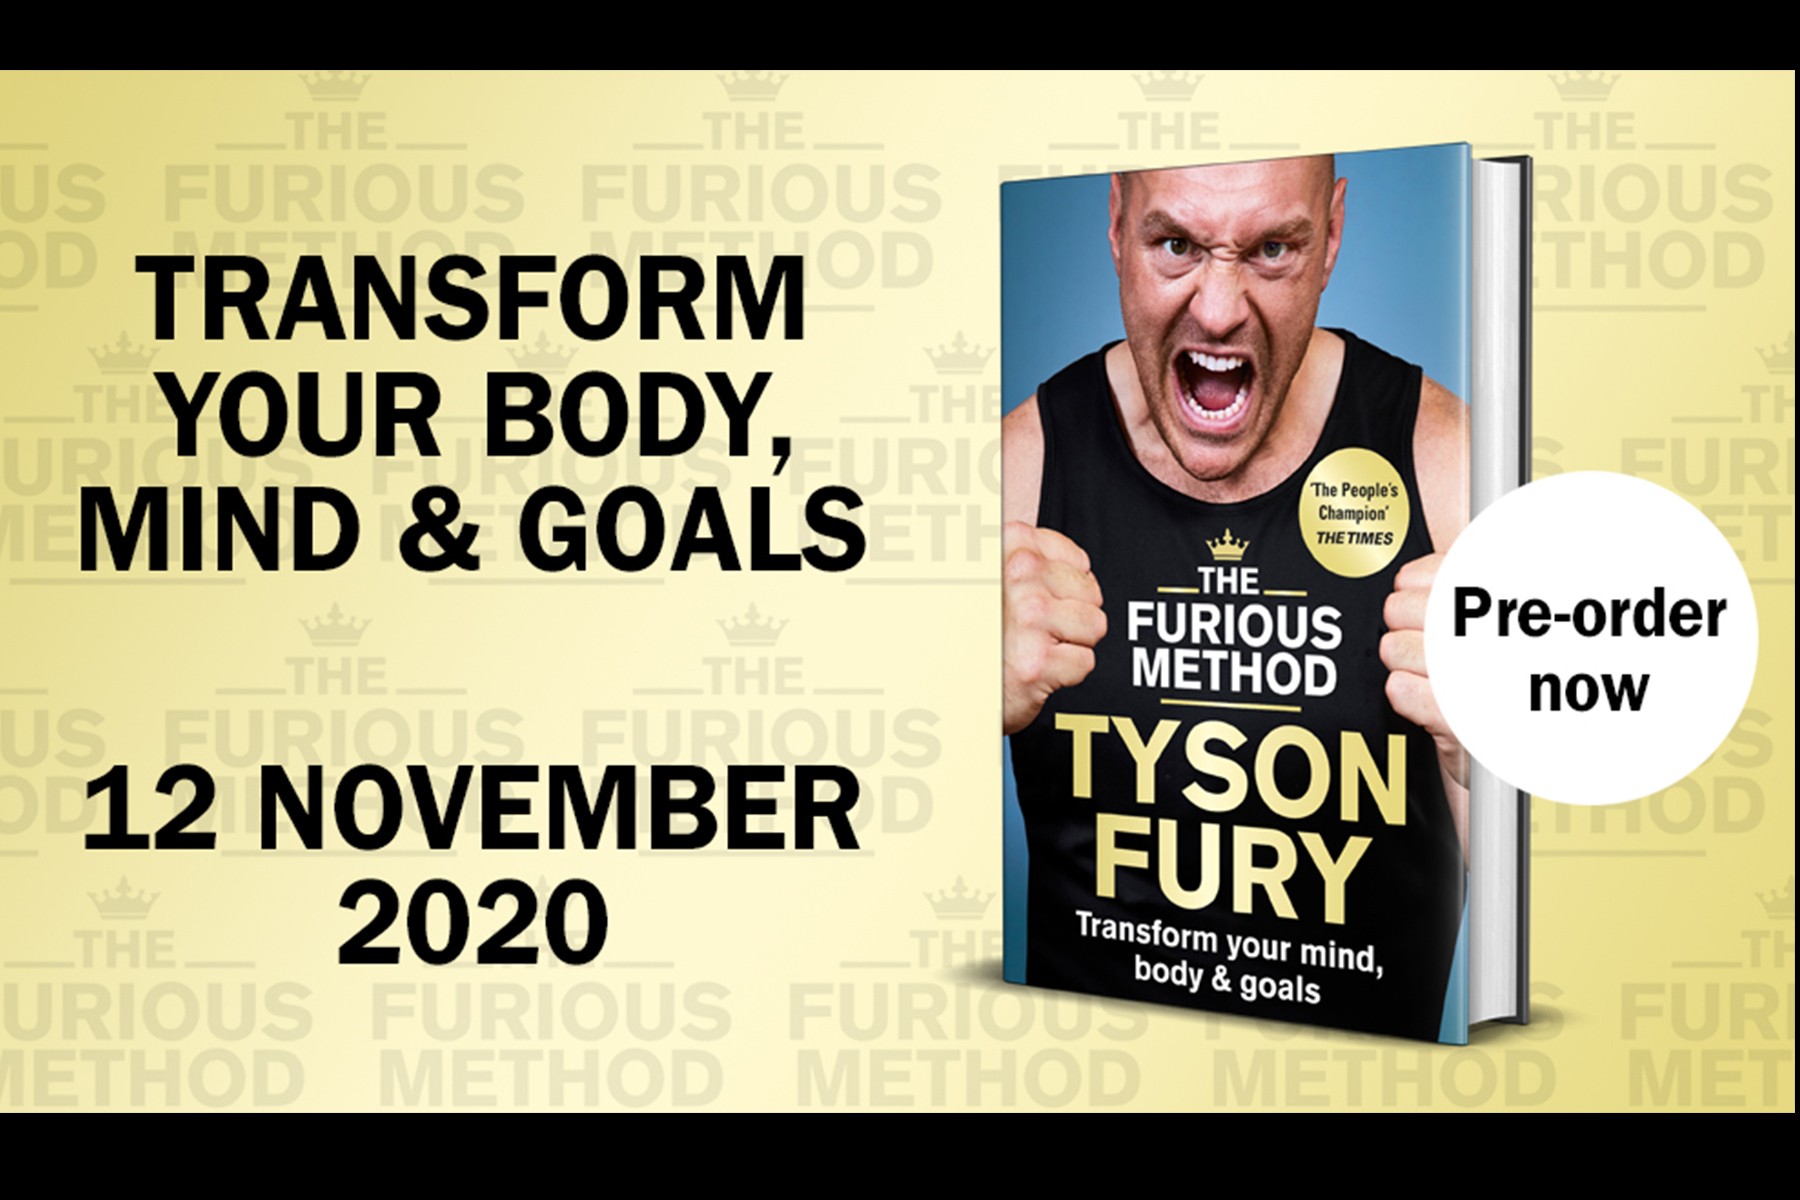 Cover of Tyson Fury's book The Furious Method with tagline 'Transform Your Body, Mind & Goals' written next to it, and date 12 November 2020.